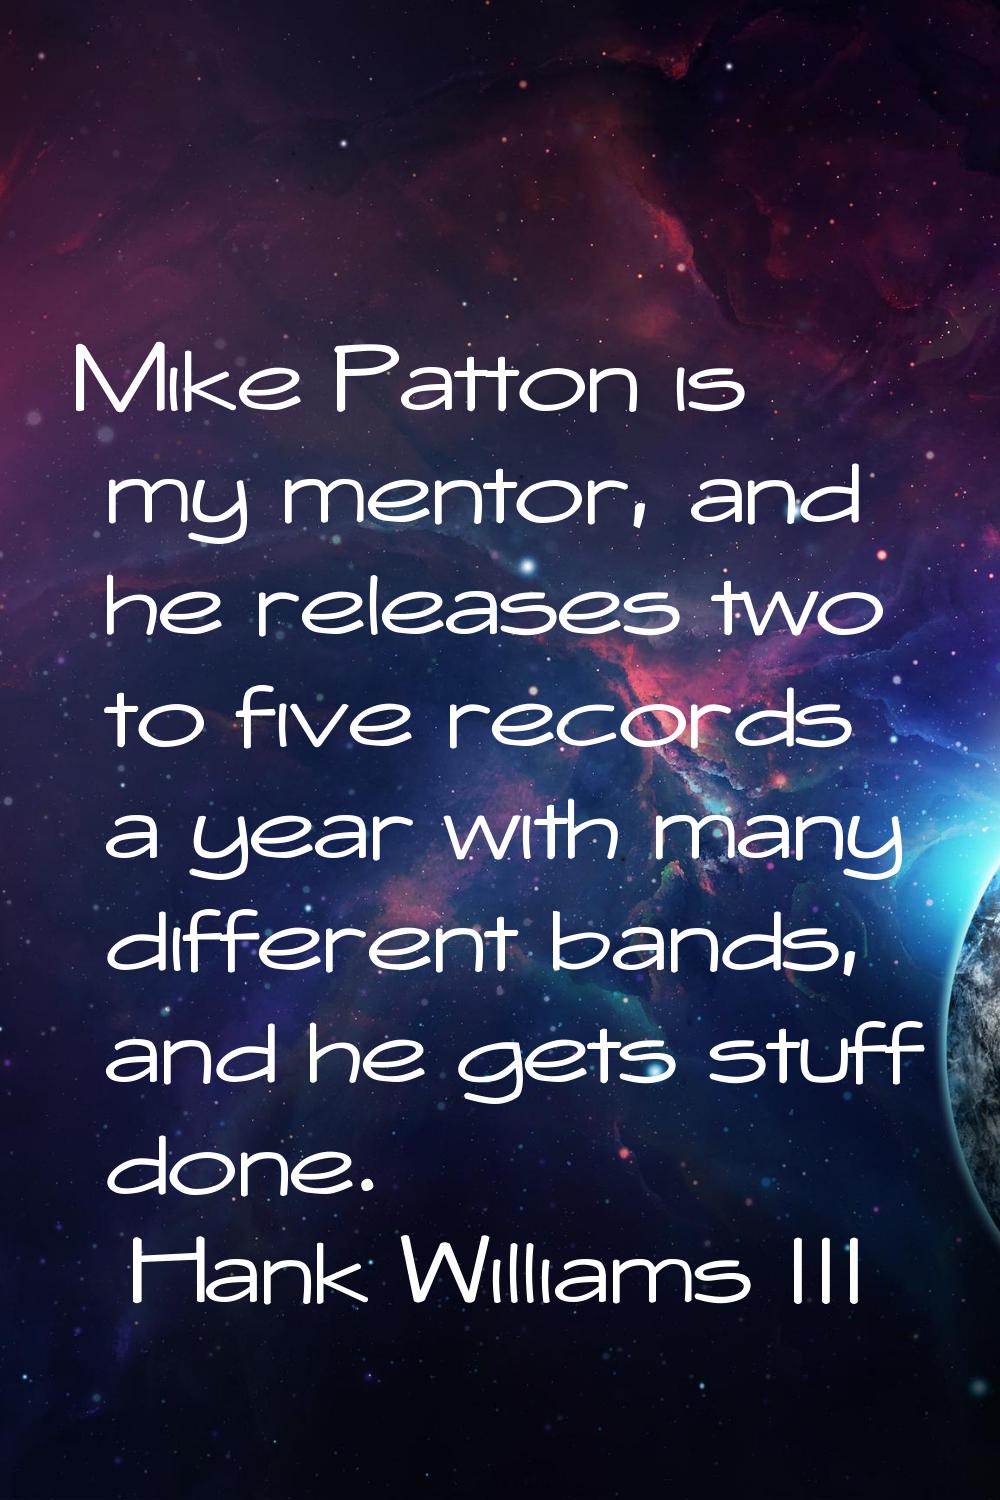 Mike Patton is my mentor, and he releases two to five records a year with many different bands, and